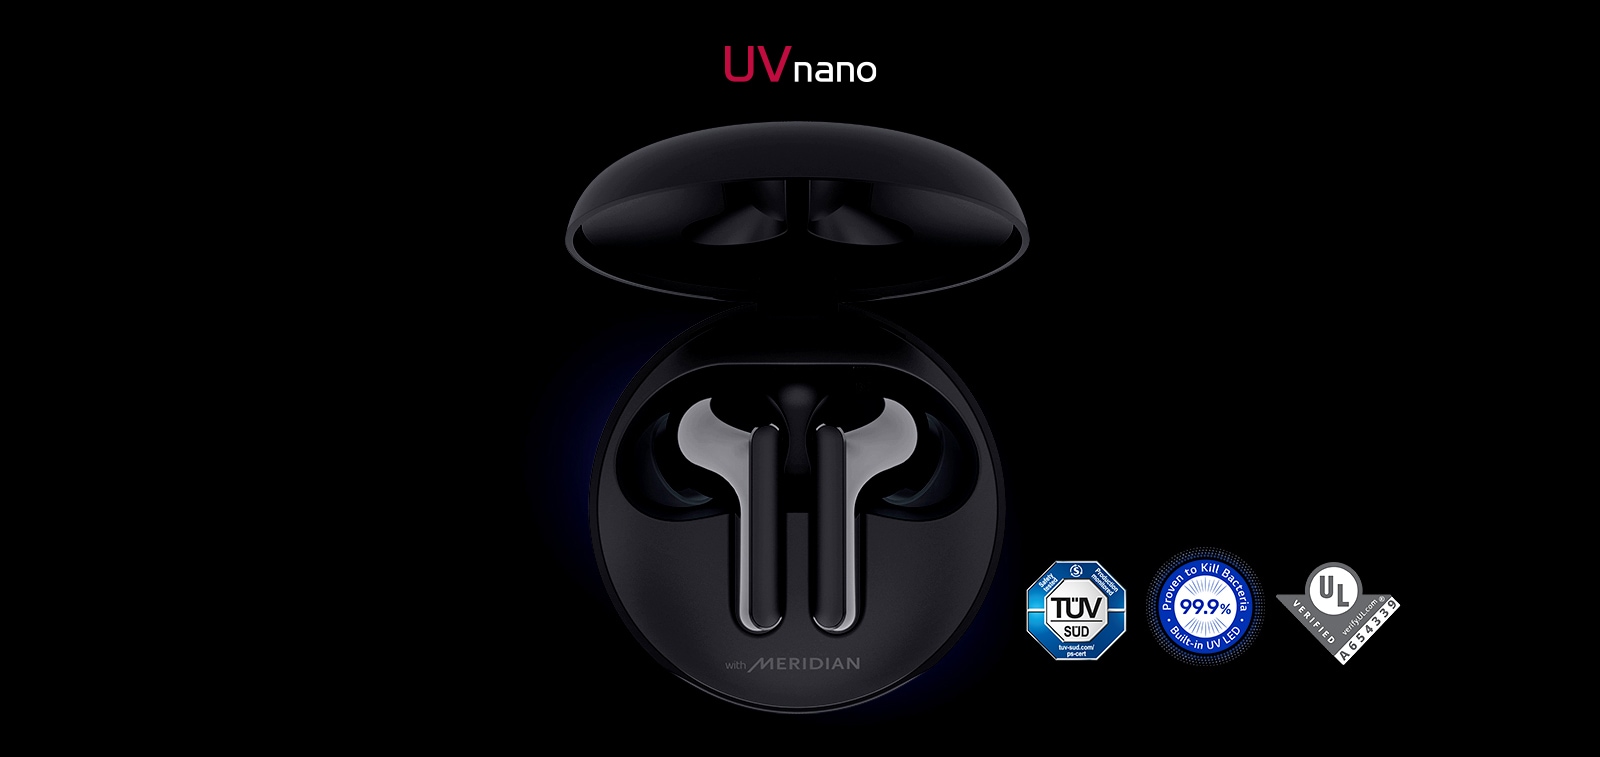 An image of the LG TONE Free cradle opened up with wireless earbuds sitting inside it and blue lighting shining to highlight the UVnano charging case feature to kill 99.9% of bacteria on speaker mesh